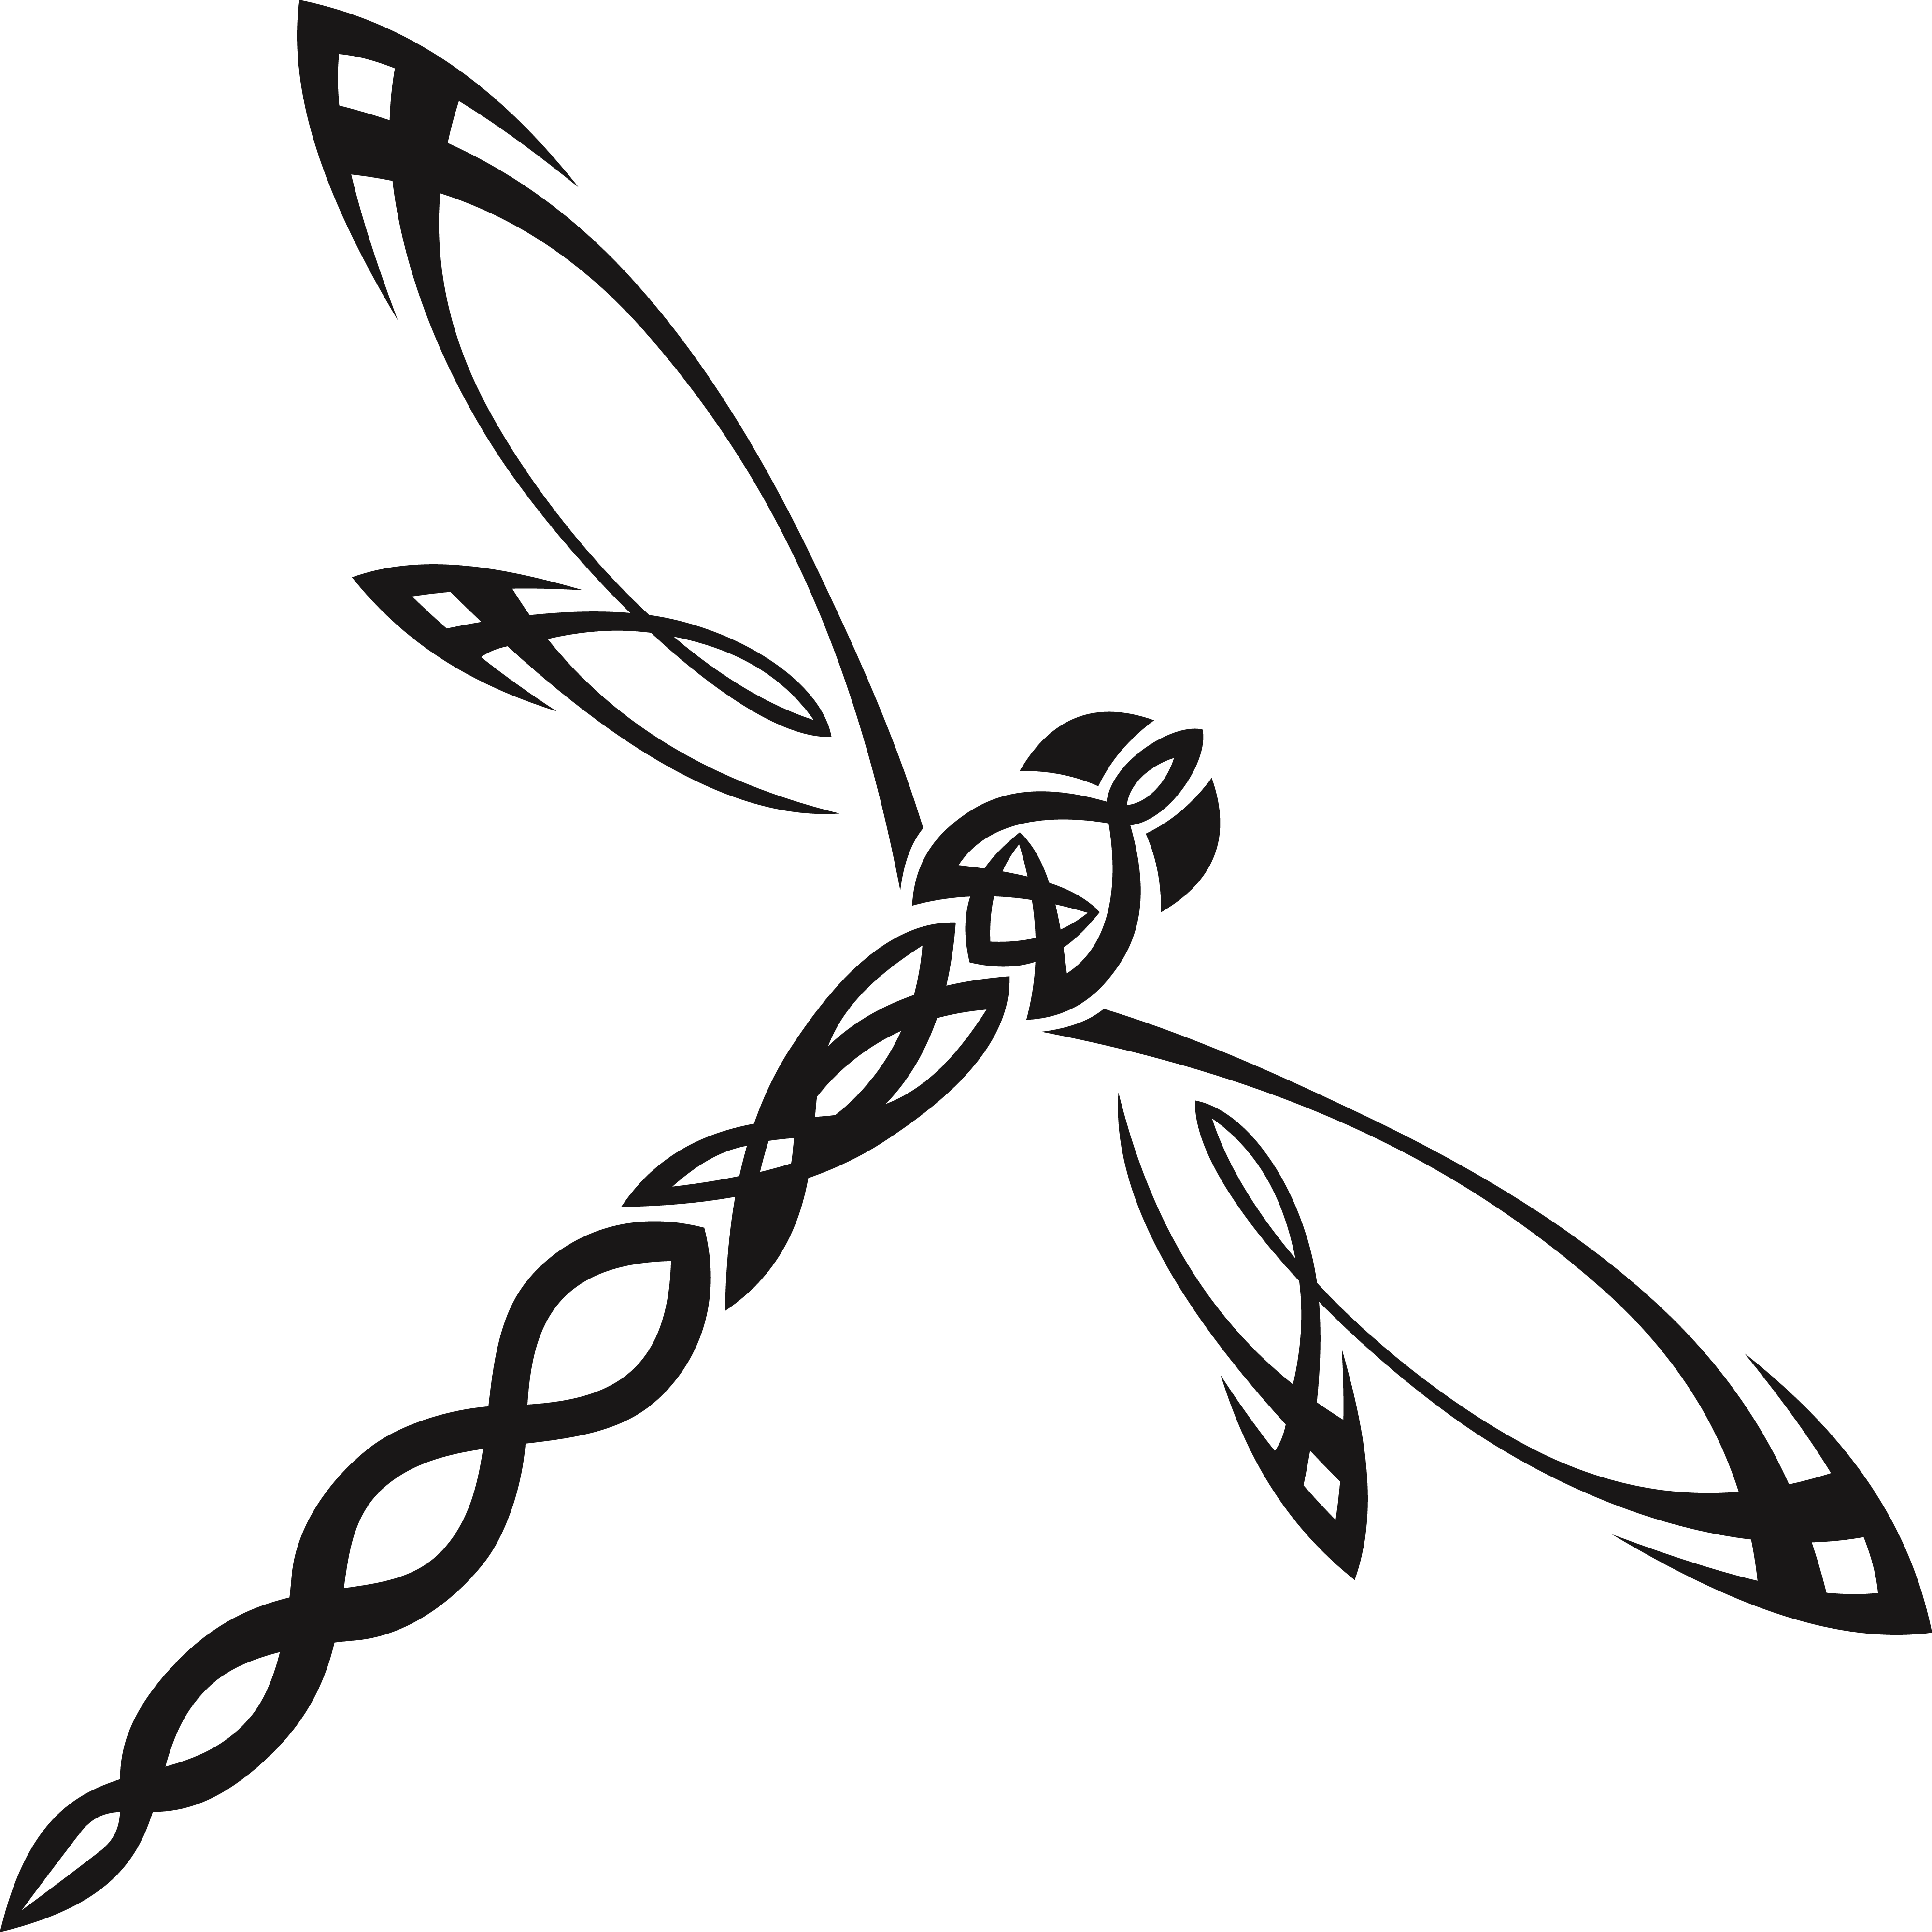 Dragonfly Insect Clip art - dragonfly png download - 4000*4000 - Free ...